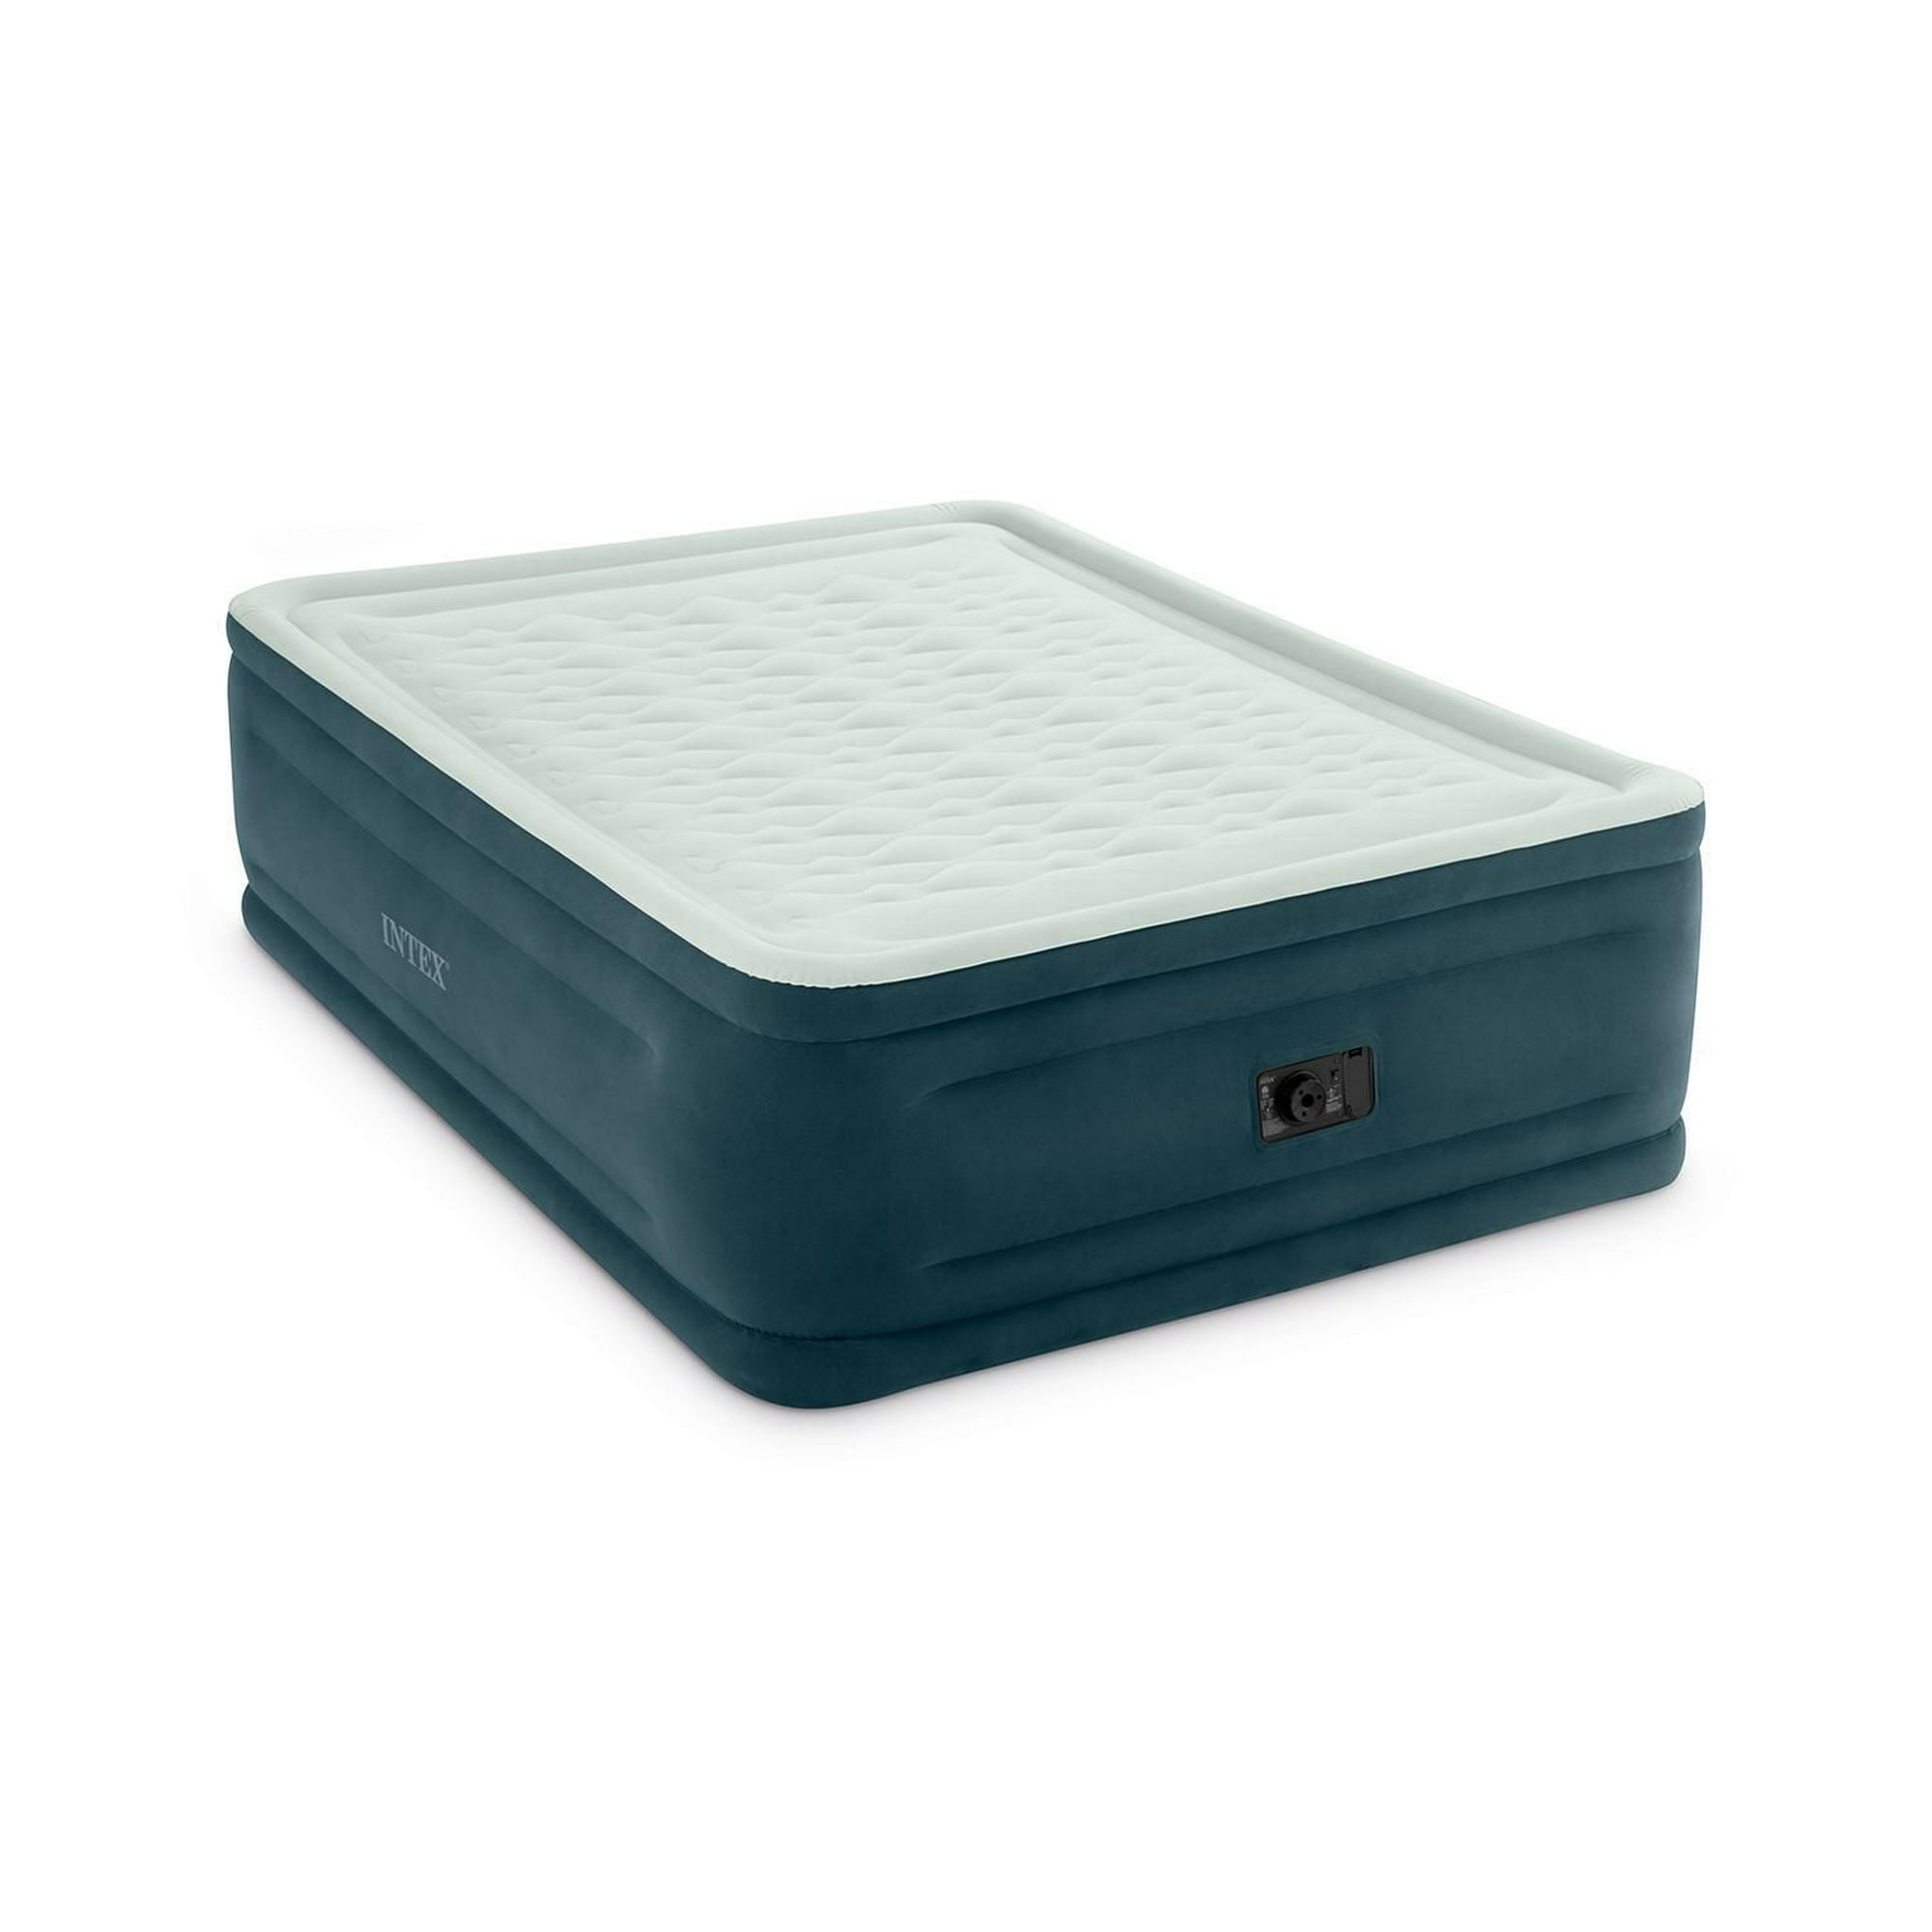 Intex 24 Dream Lux Pillow Top Dura-Beam Airbed Mattress with